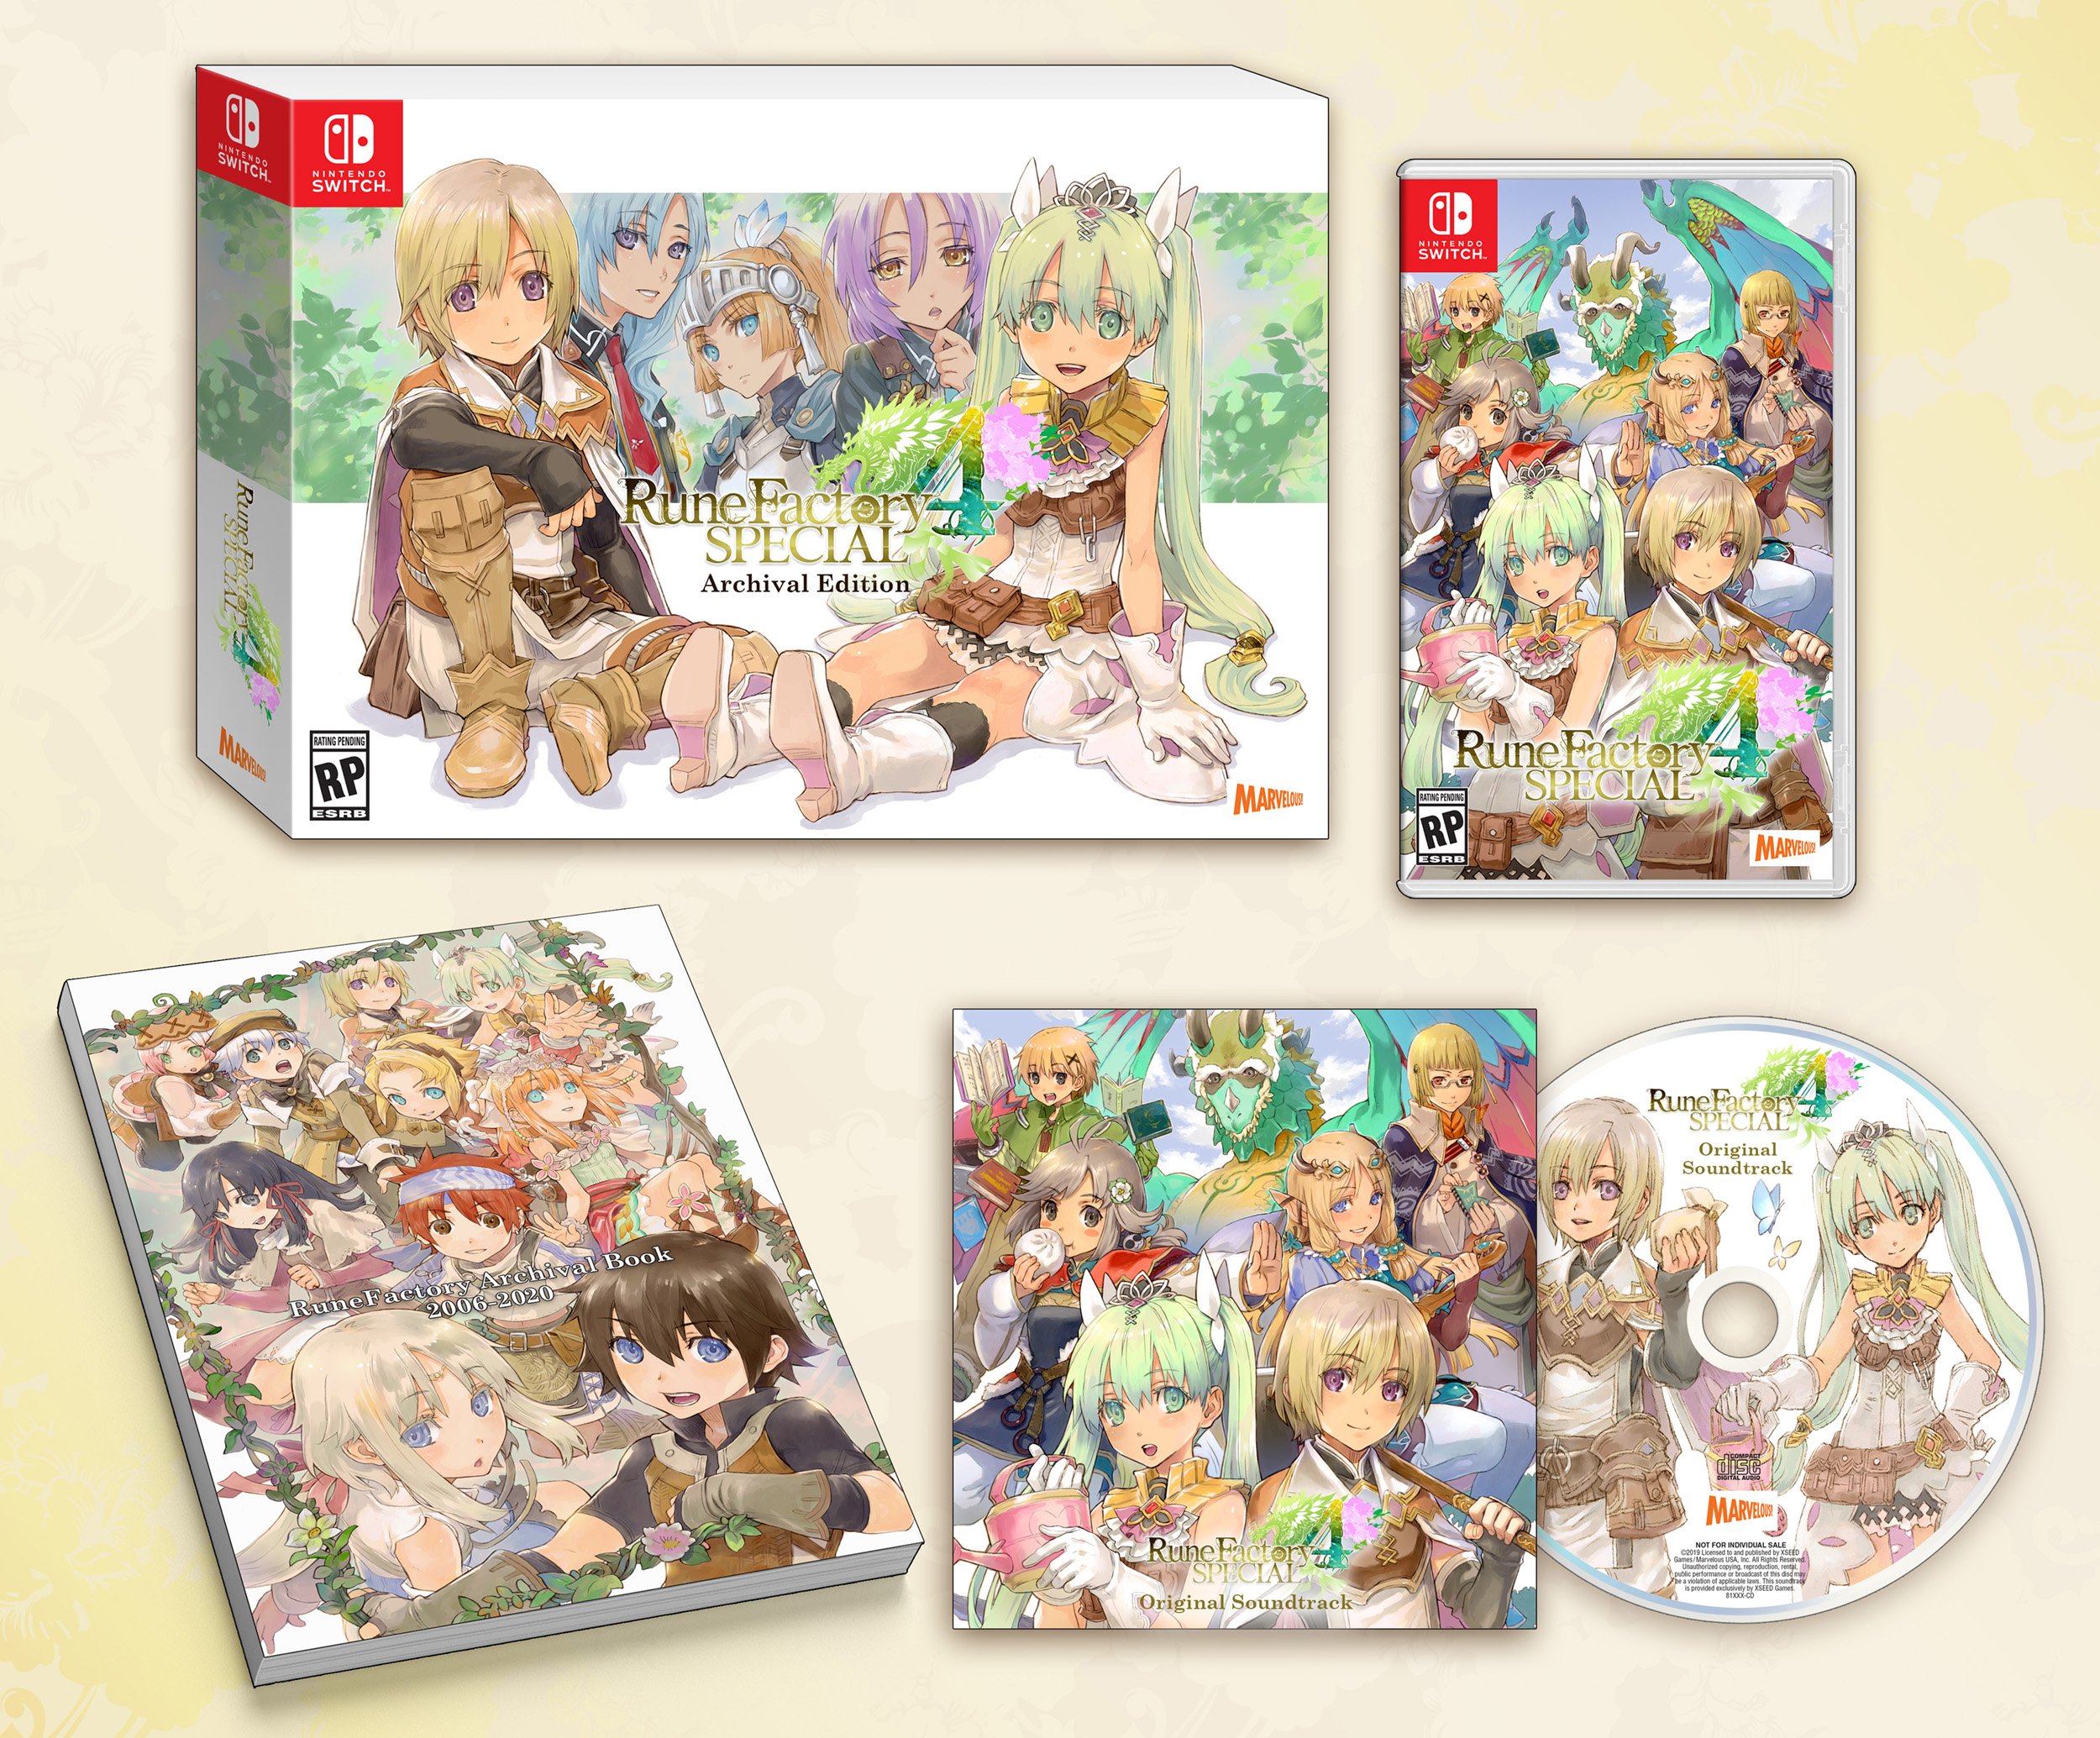 Rune-Factory-4-Special-Archival-Edition_